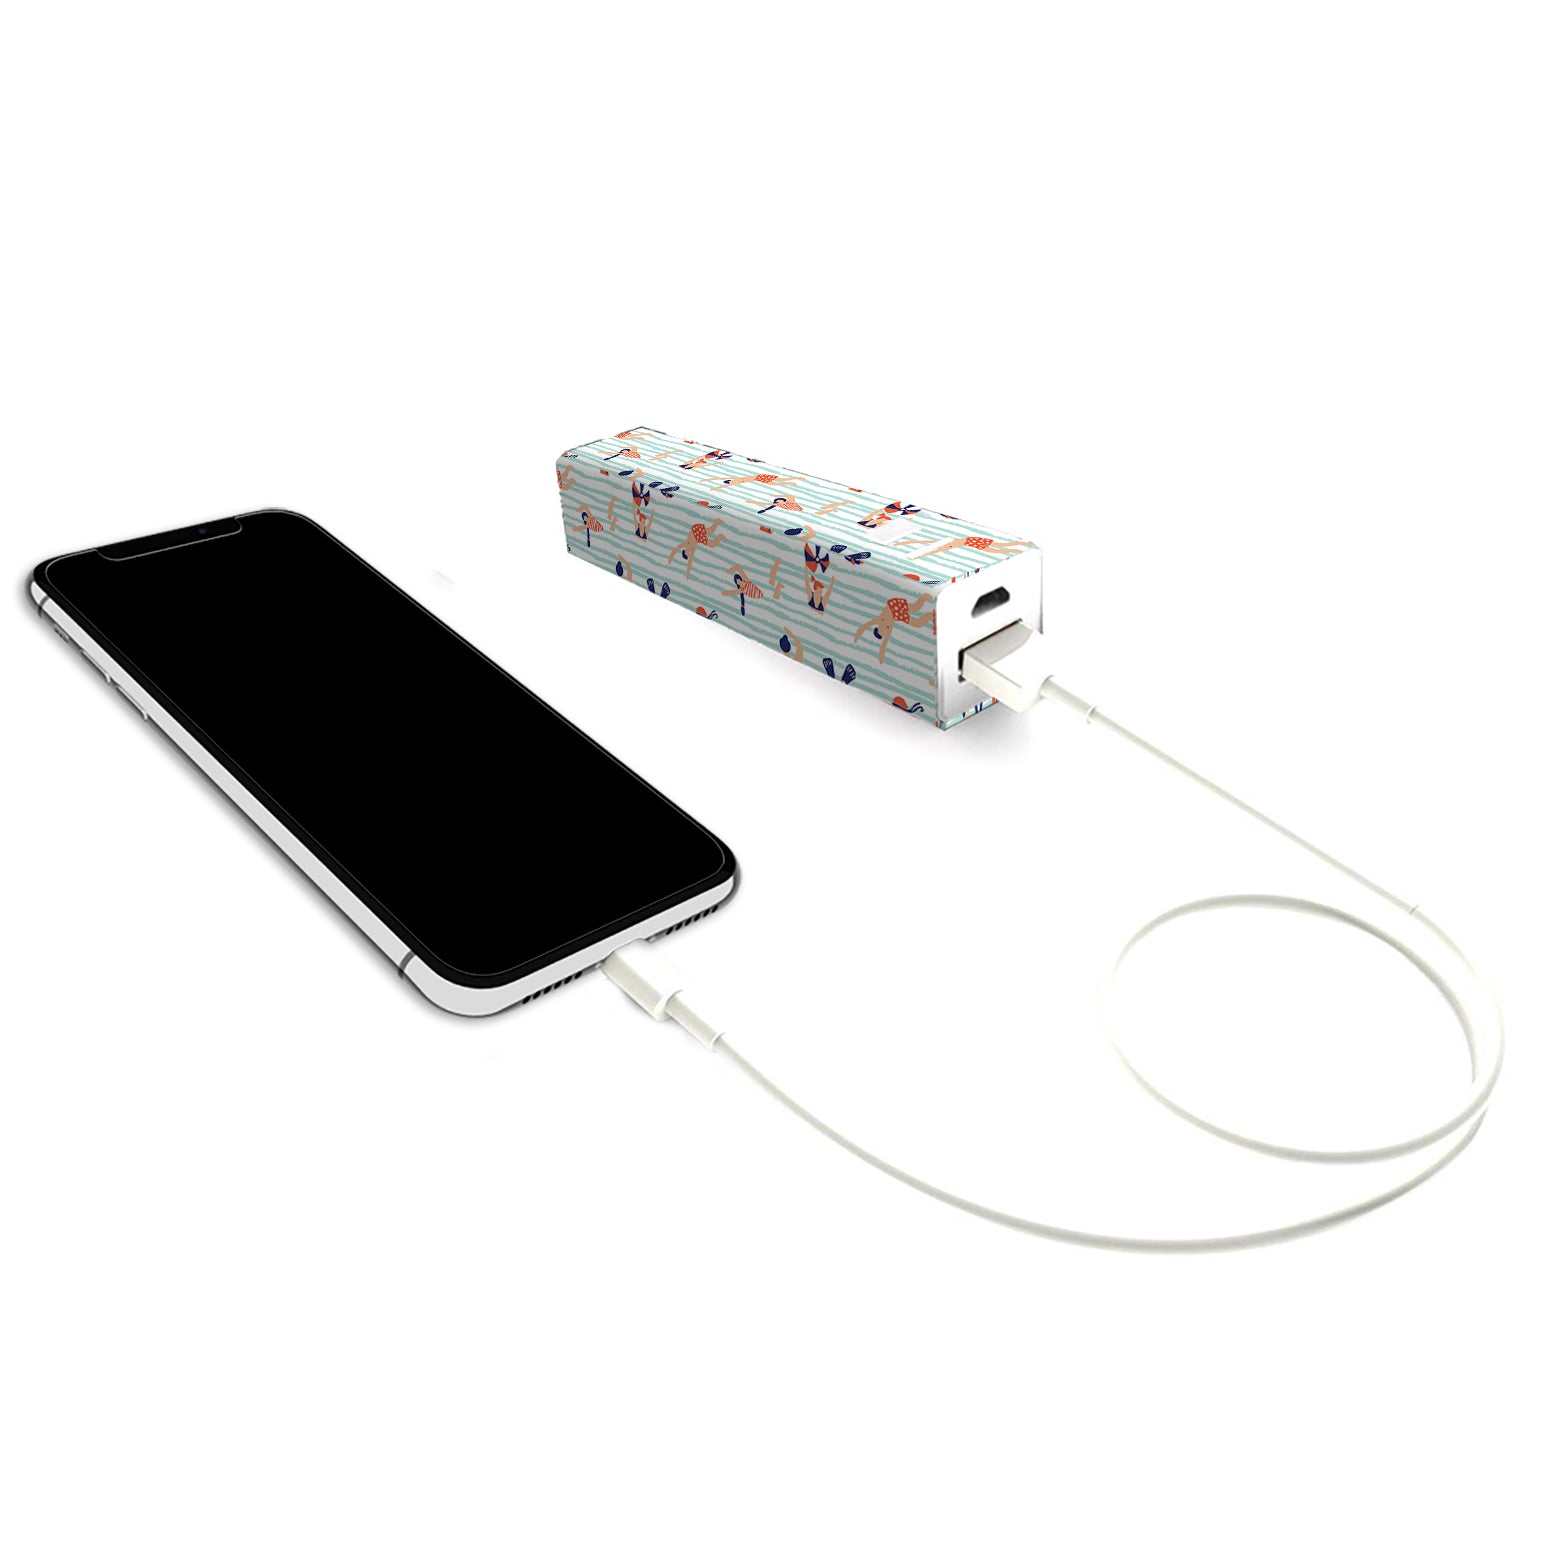 Portable Phone Charger Swimmer